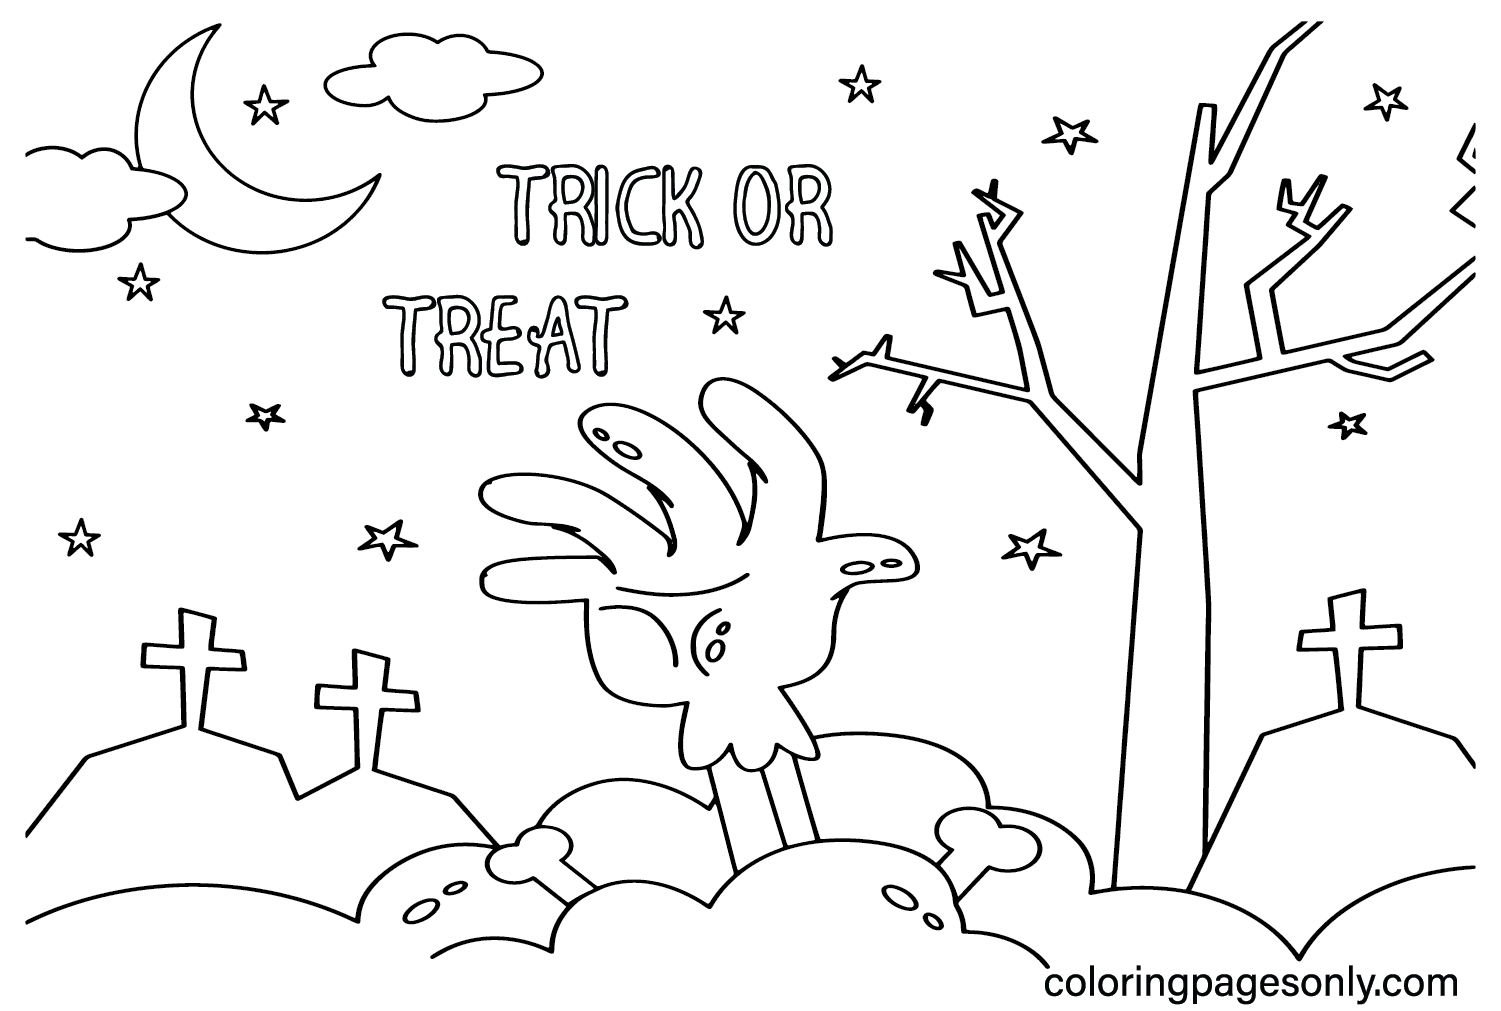 Trick or Treat Coloring Page PDF